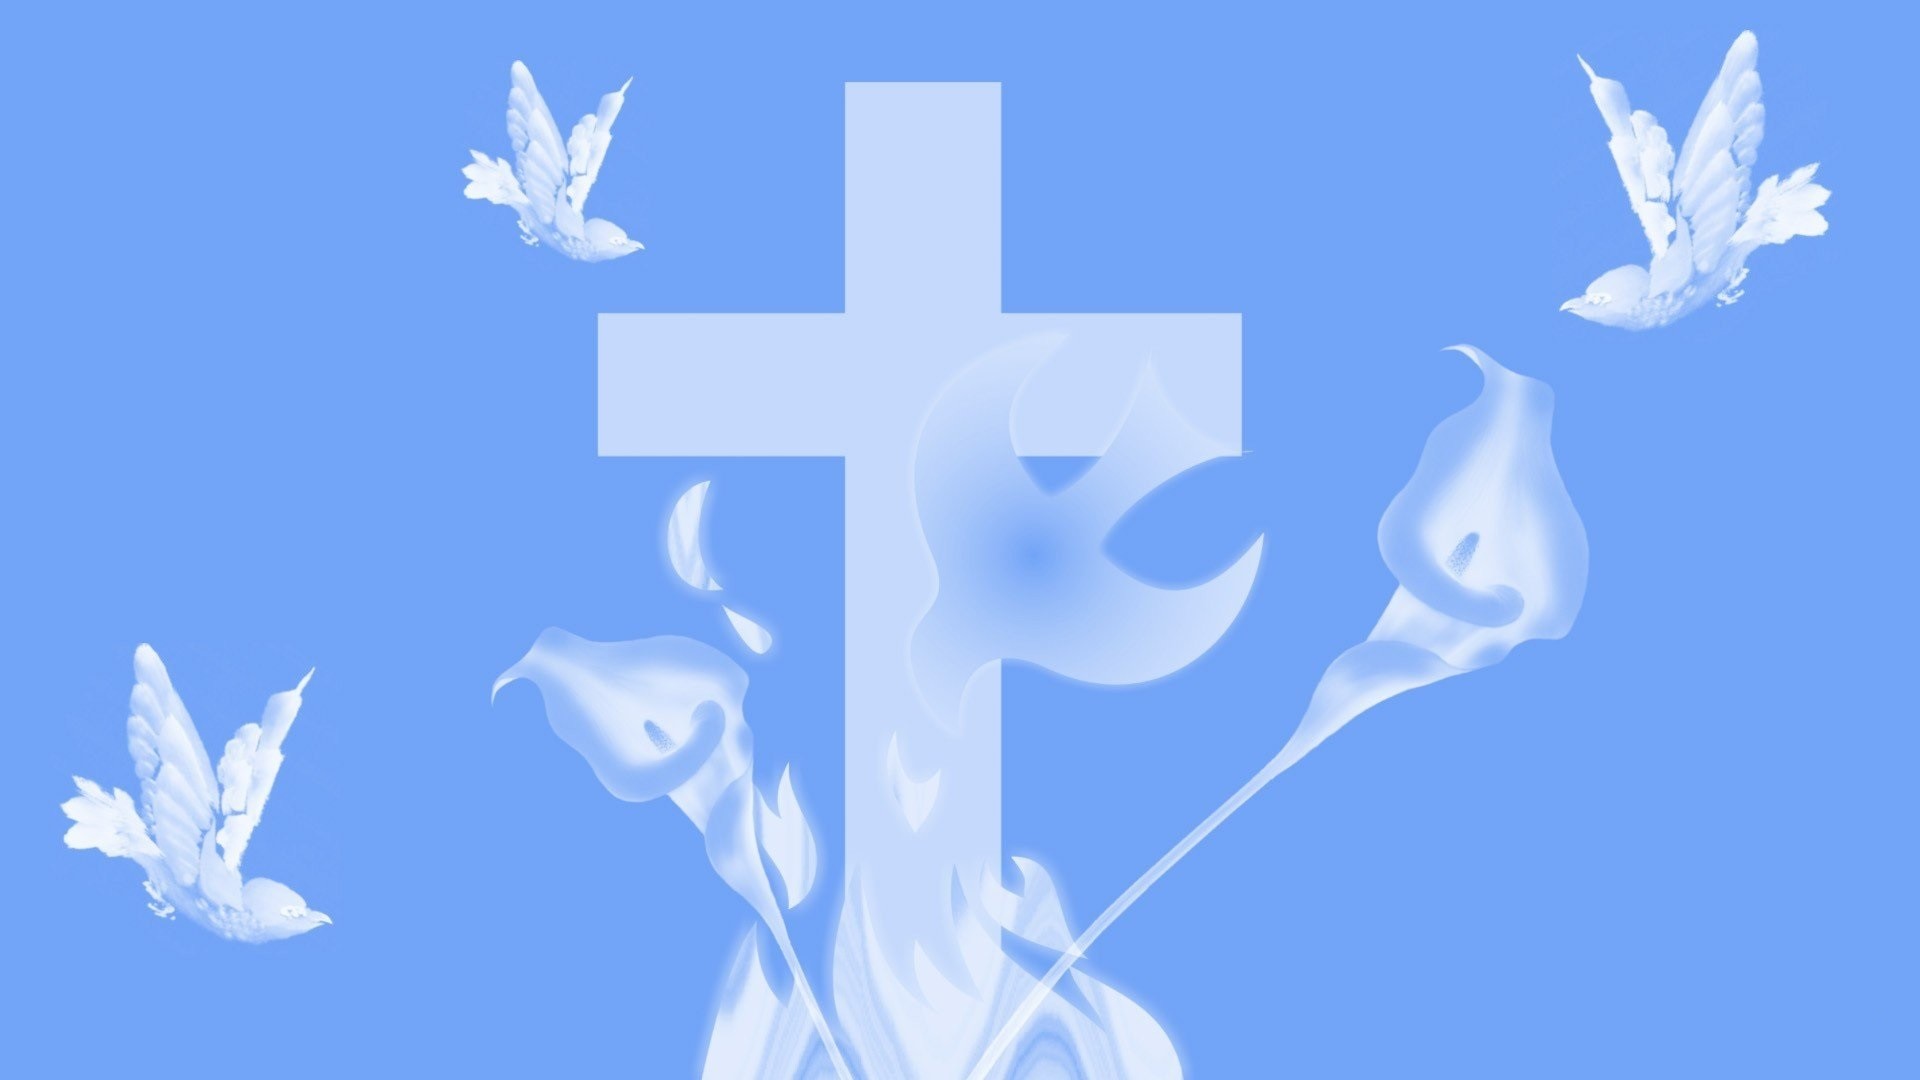 1920x1080 Easter Peace Cross Doves Widescreen Lily Wallpapers Images.